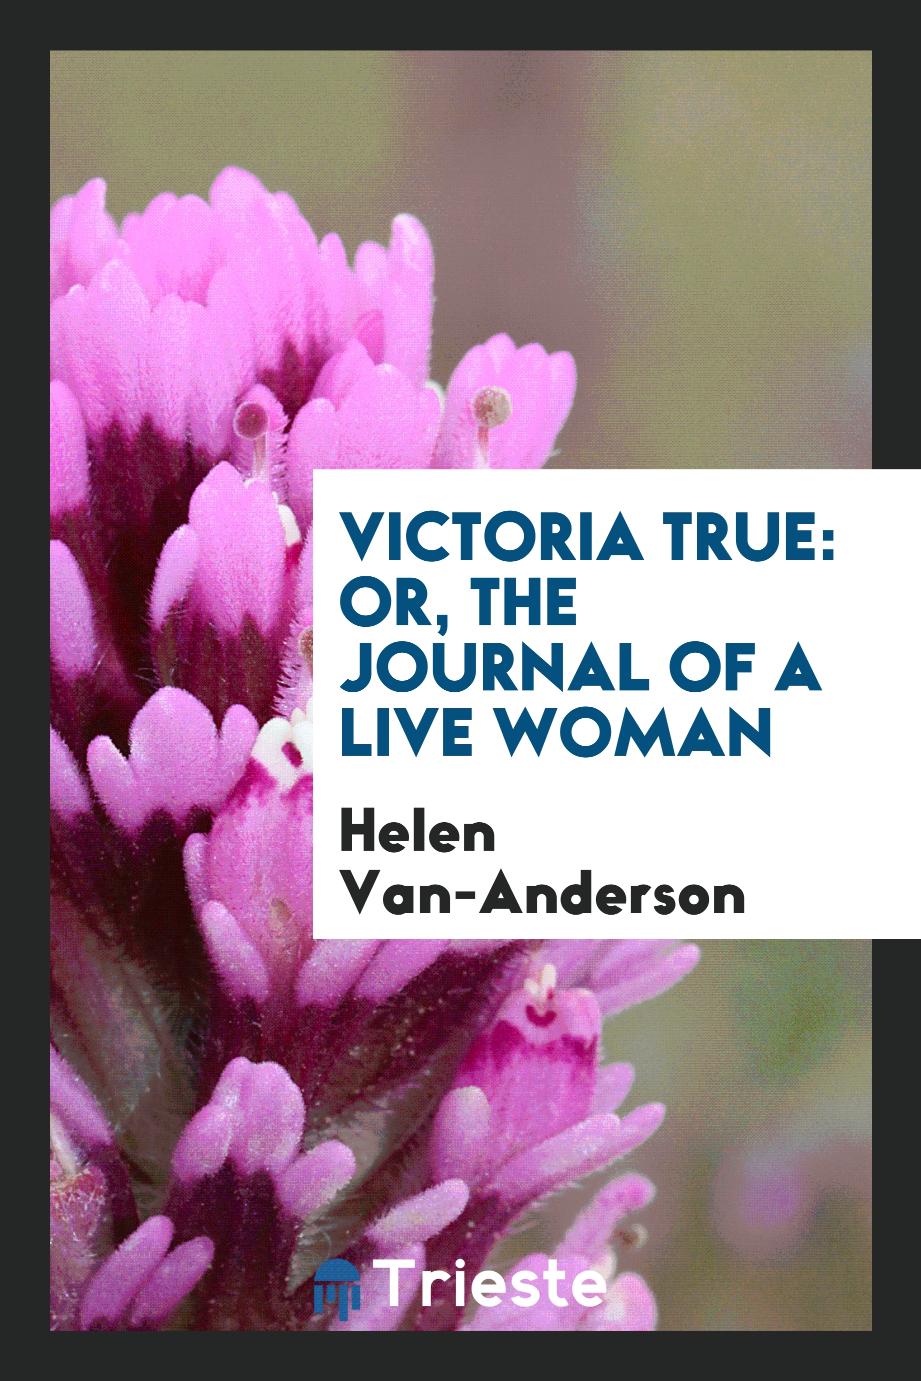 Victoria True: Or, The Journal of a Live Woman